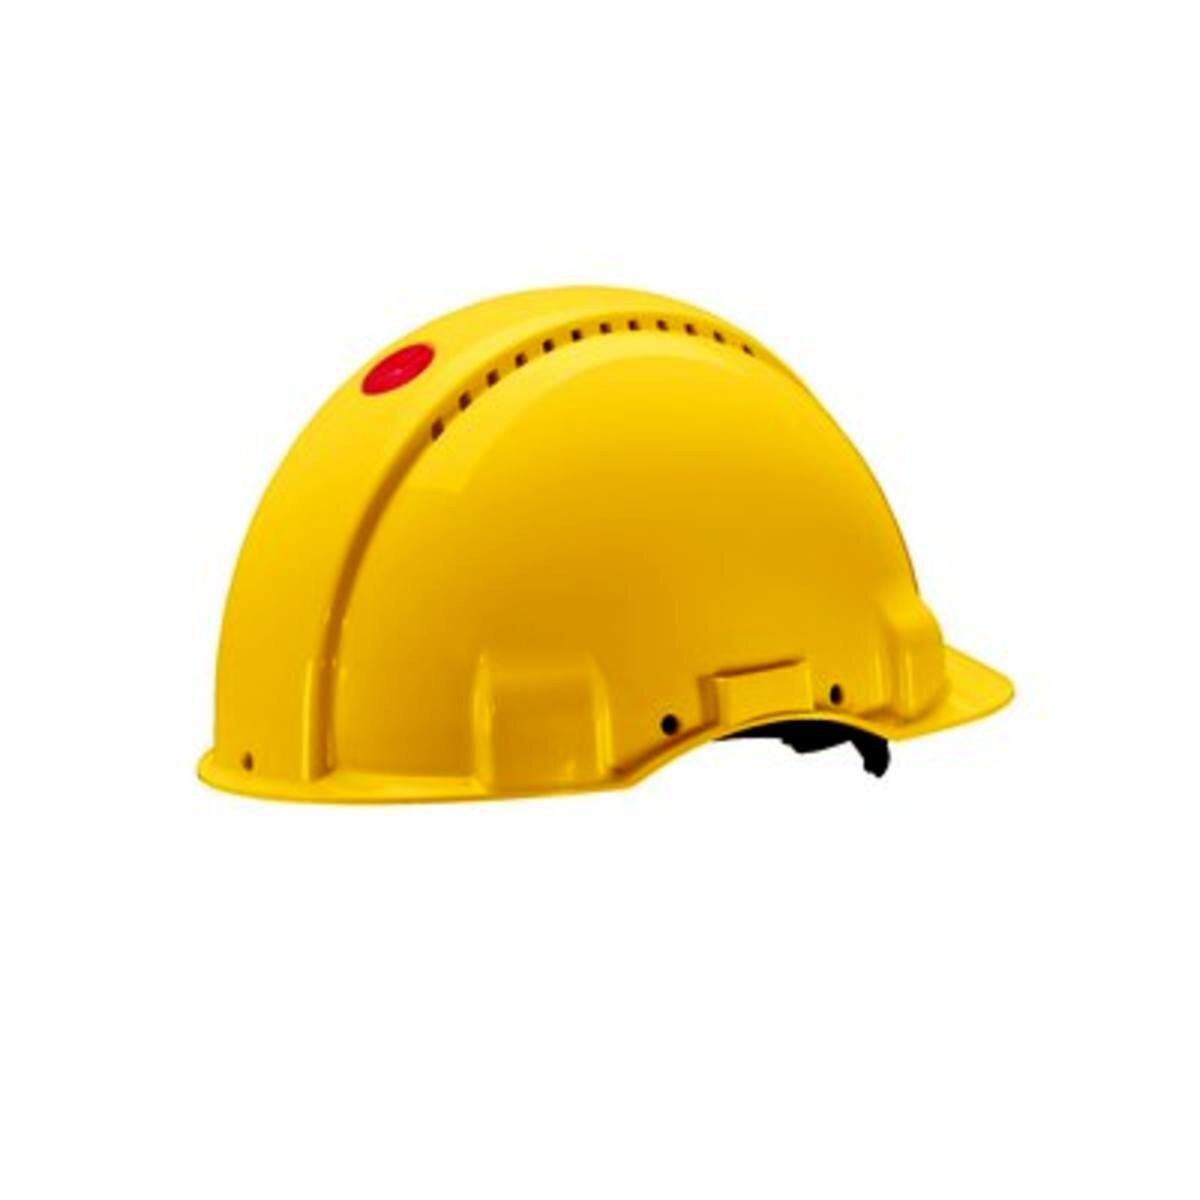 3M G3000 safety helmet G30CUY in yellow, ventilated, with uvicator, pinlock and plastic sweatband